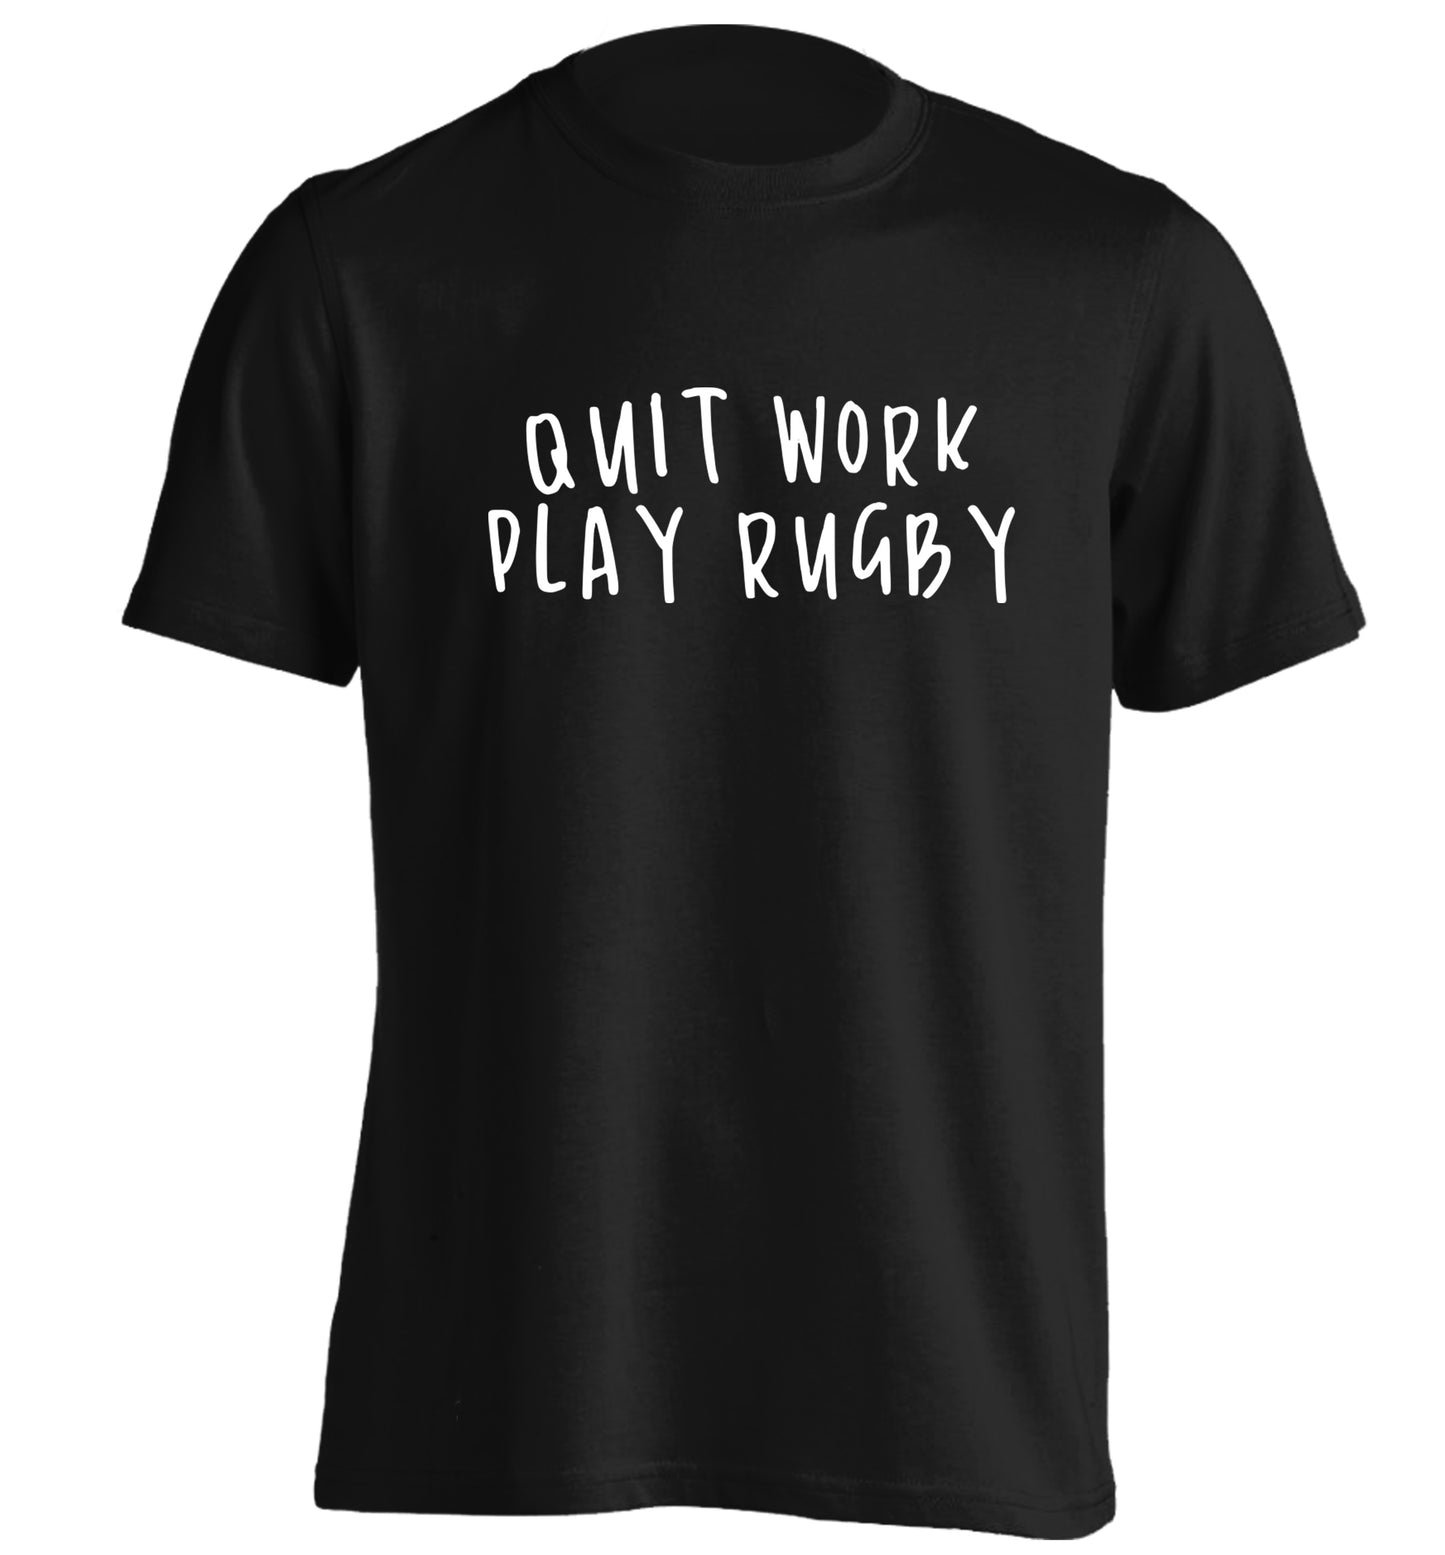 Quit work play rugby adults unisex black Tshirt 2XL